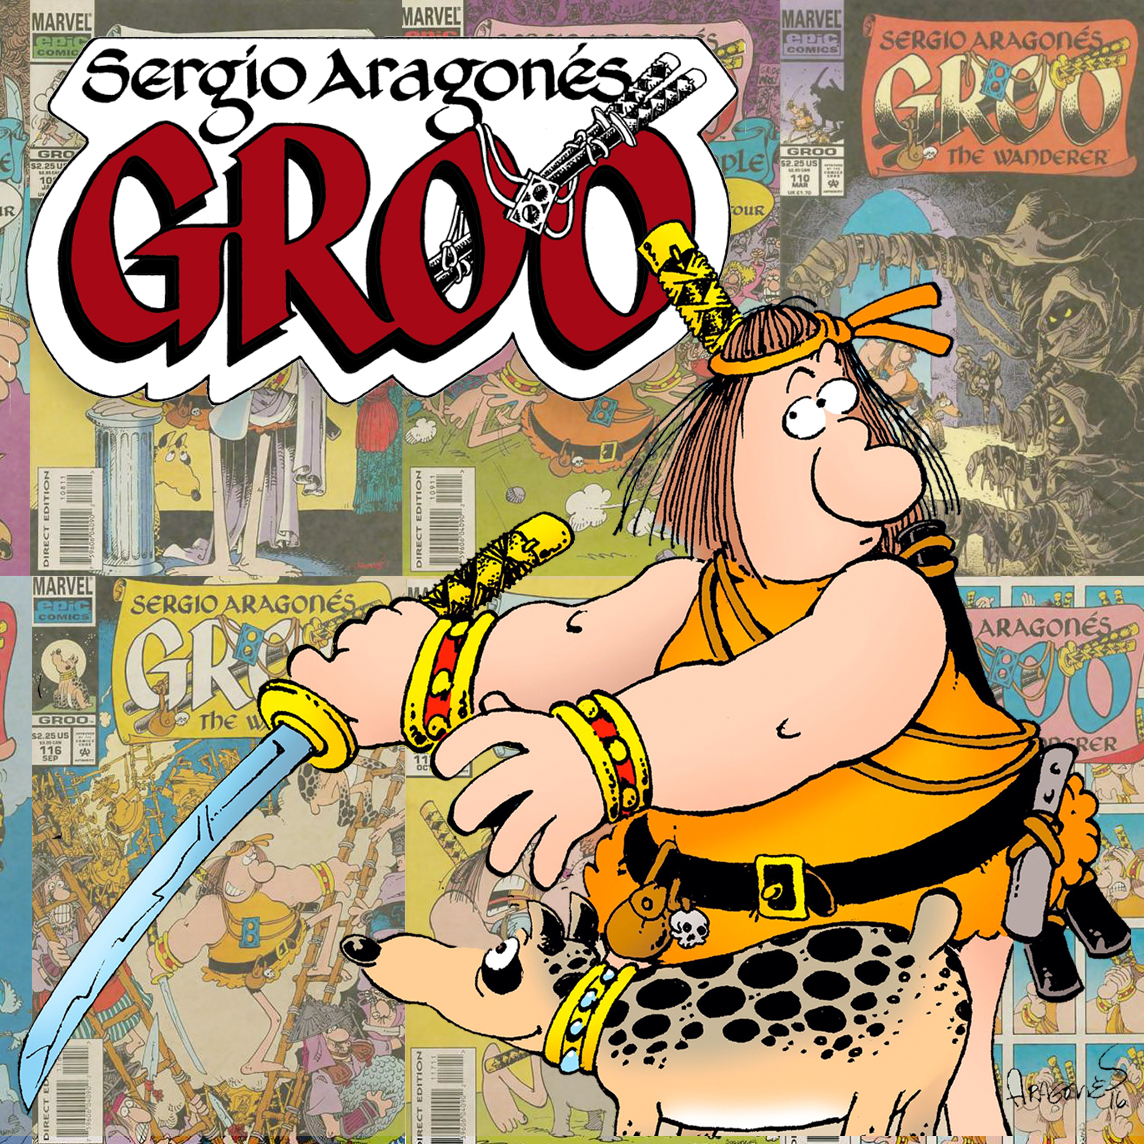 Sergio Aragones’ ‘Groo the Wanderer’ Goes to Animation